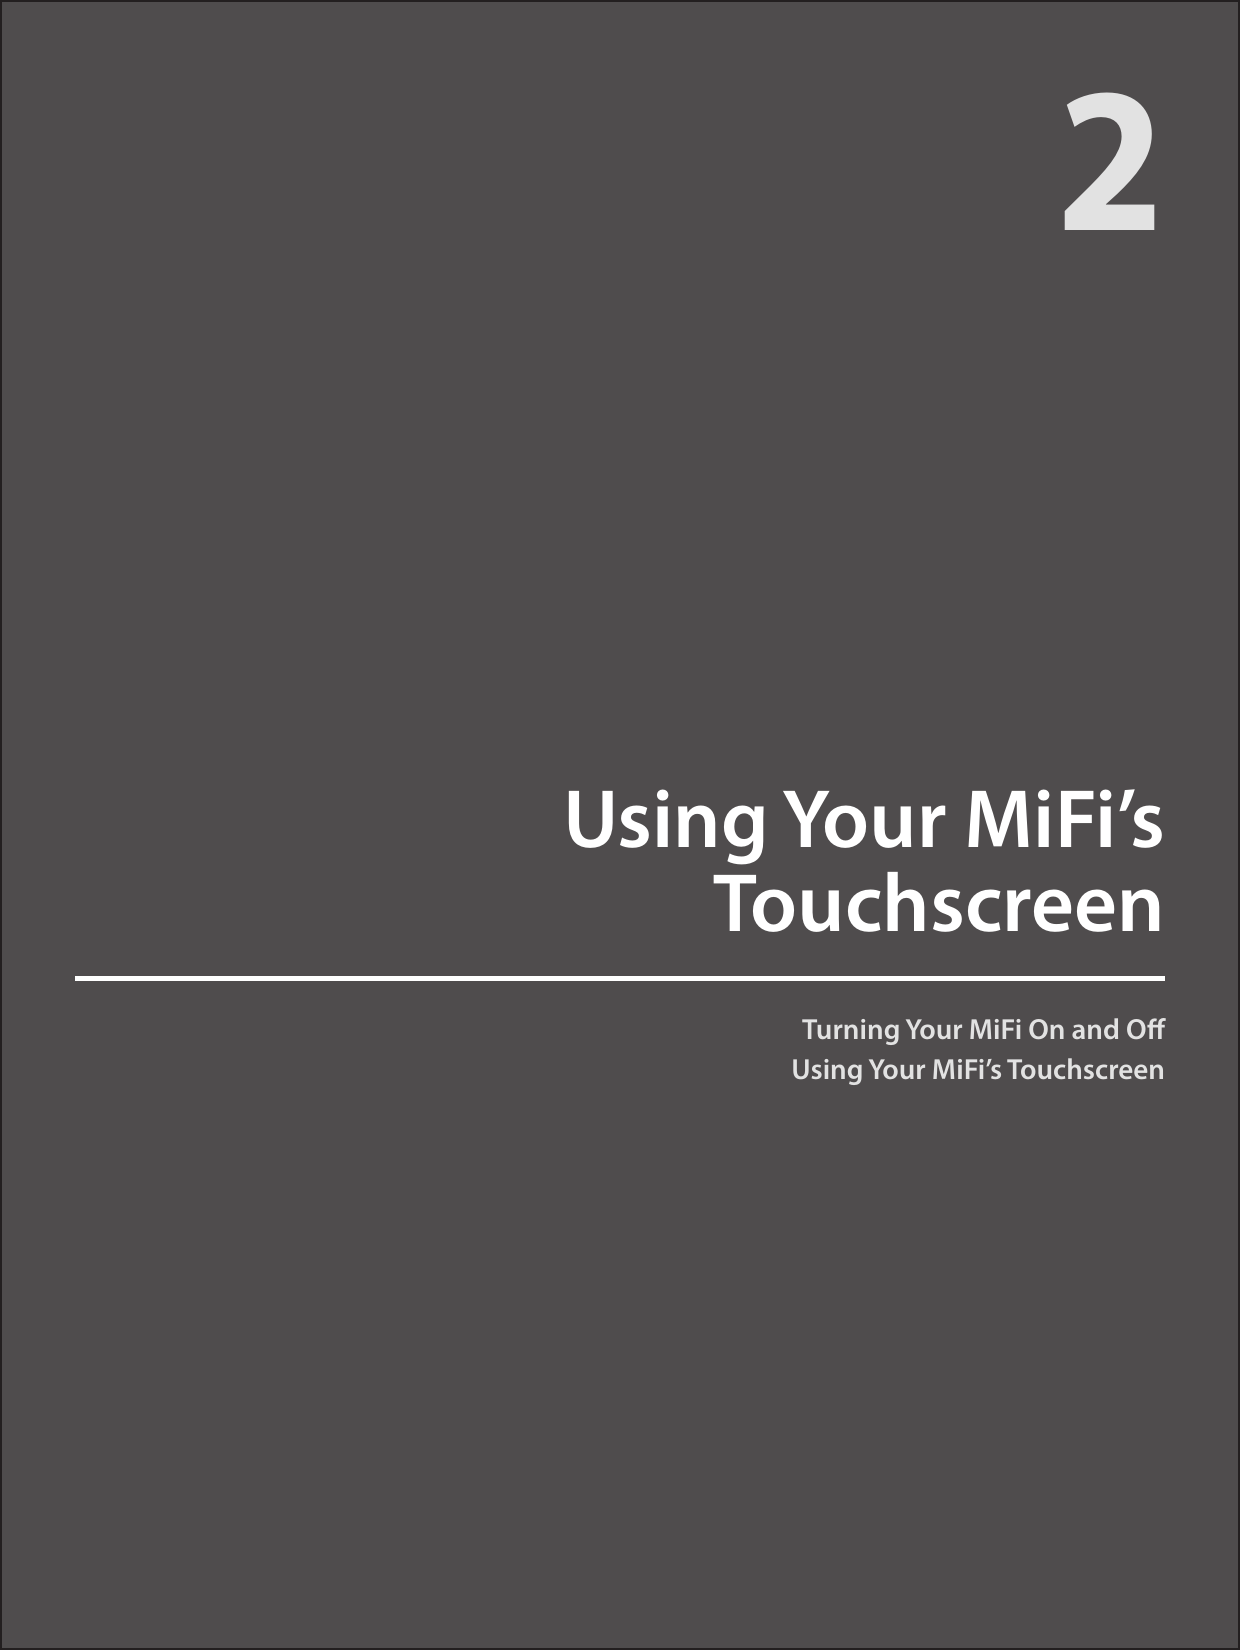 Turning Your MiFi On and OUsing Your MiFi’s TouchscreenUsing Your MiFi’s  Touchscreen2